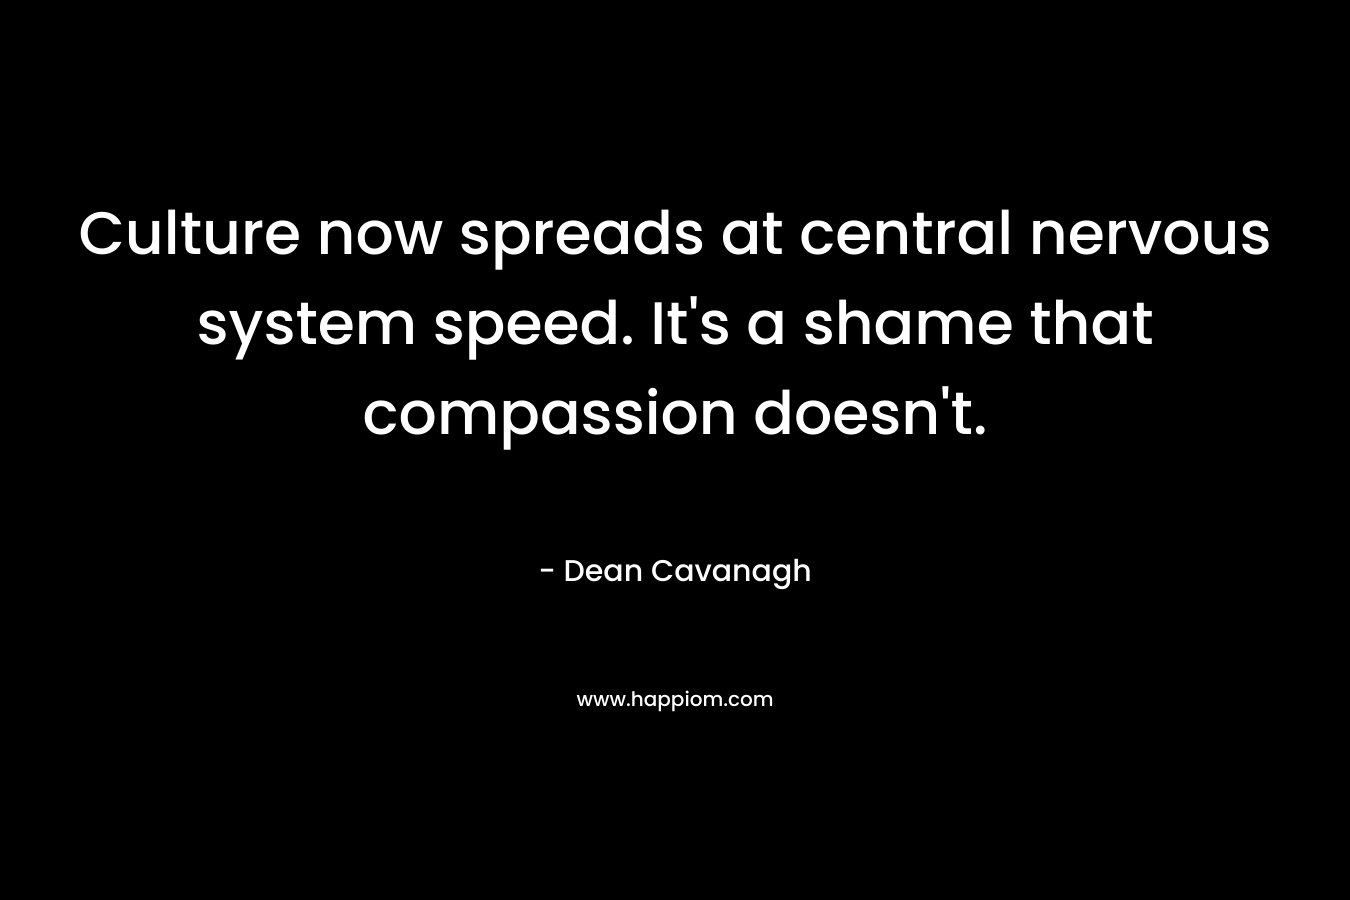 Culture now spreads at central nervous system speed. It's a shame that compassion doesn't.